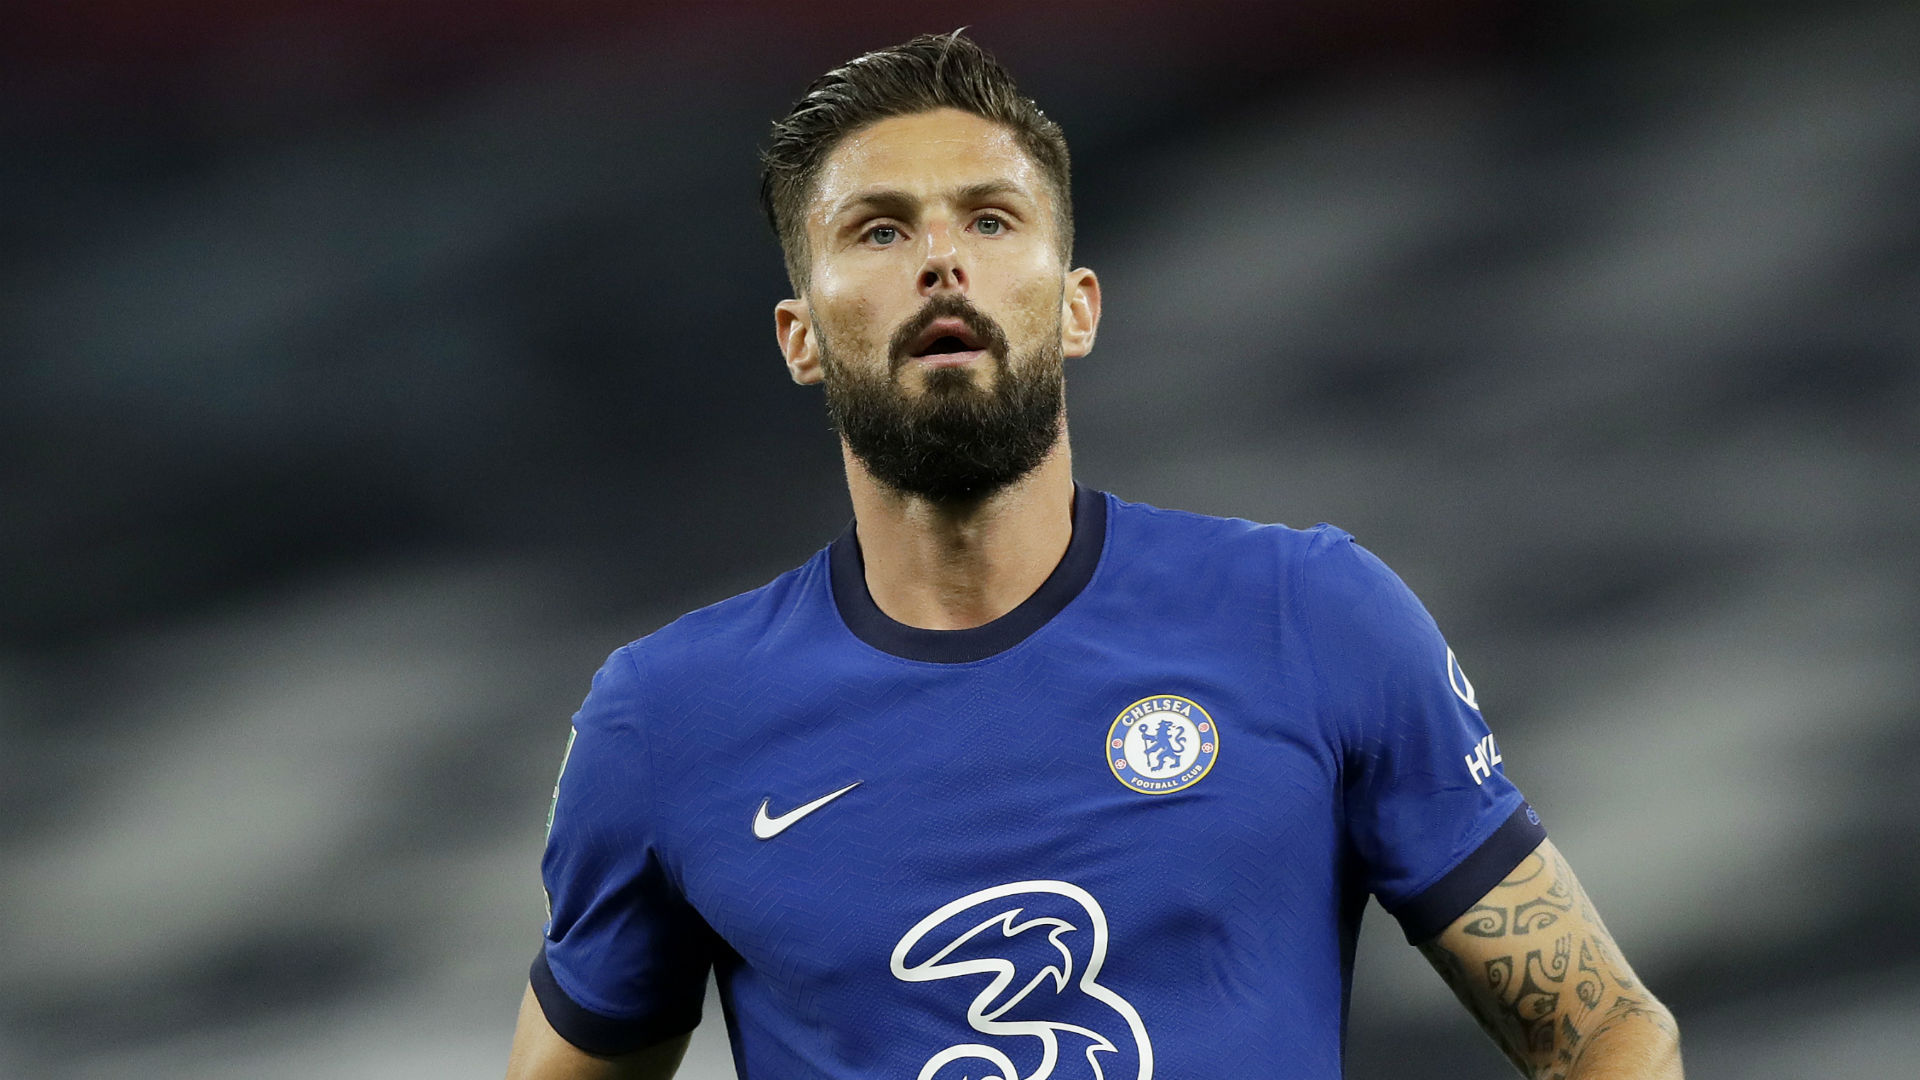 ‘Give Giroud game time and he will score goals’ – Chelsea striker has to leave in January, claims Clichy